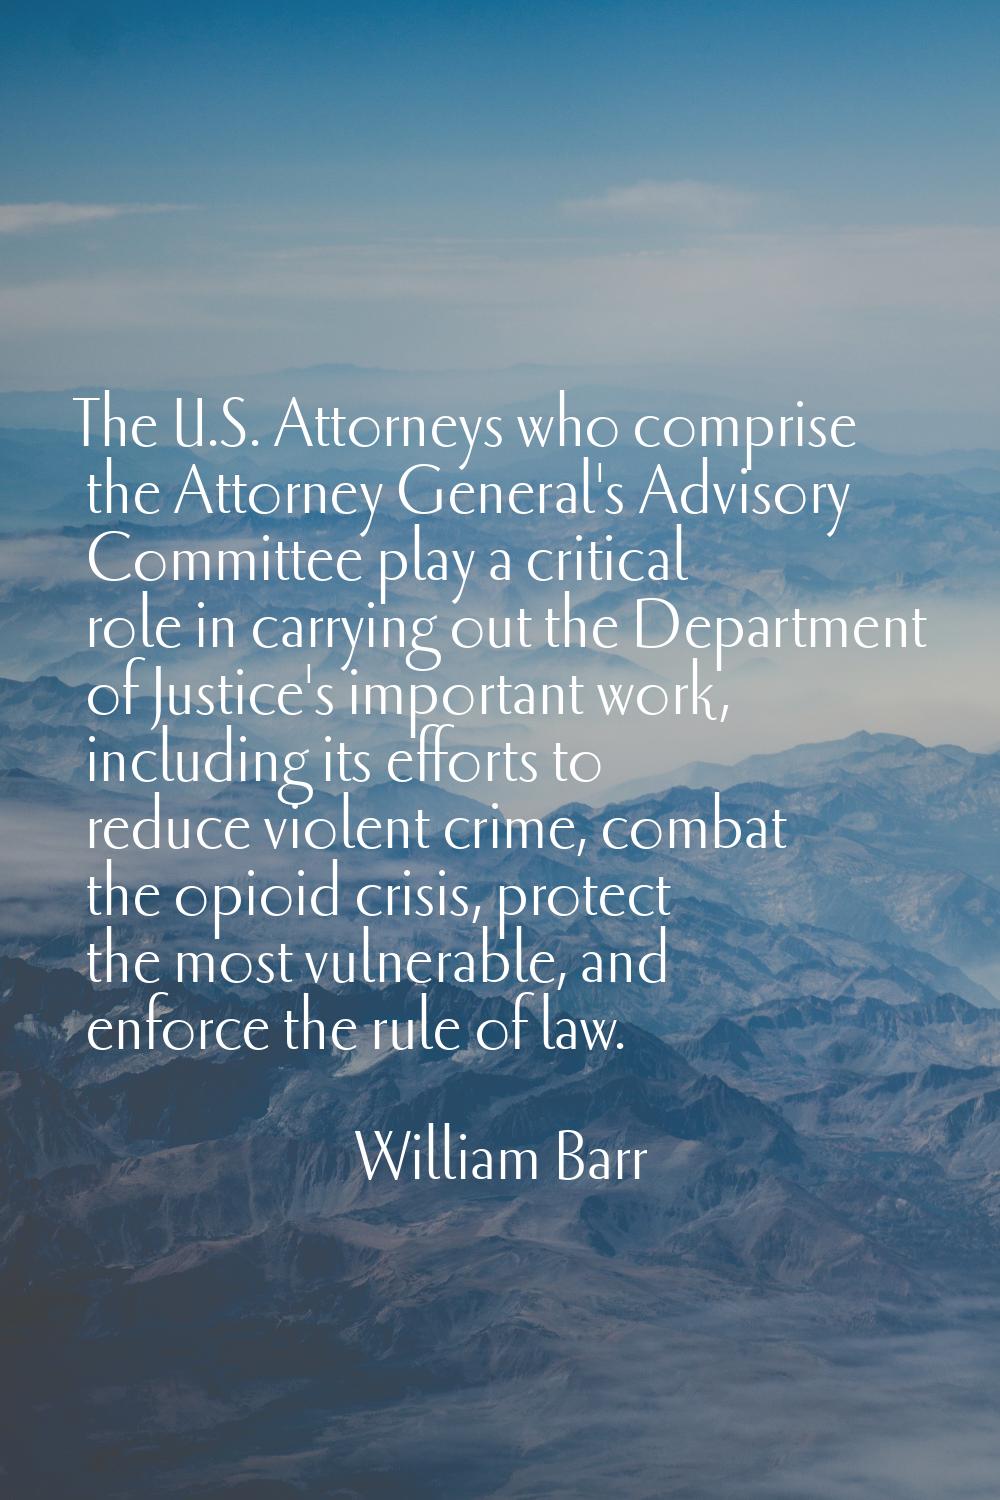 The U.S. Attorneys who comprise the Attorney General's Advisory Committee play a critical role in c